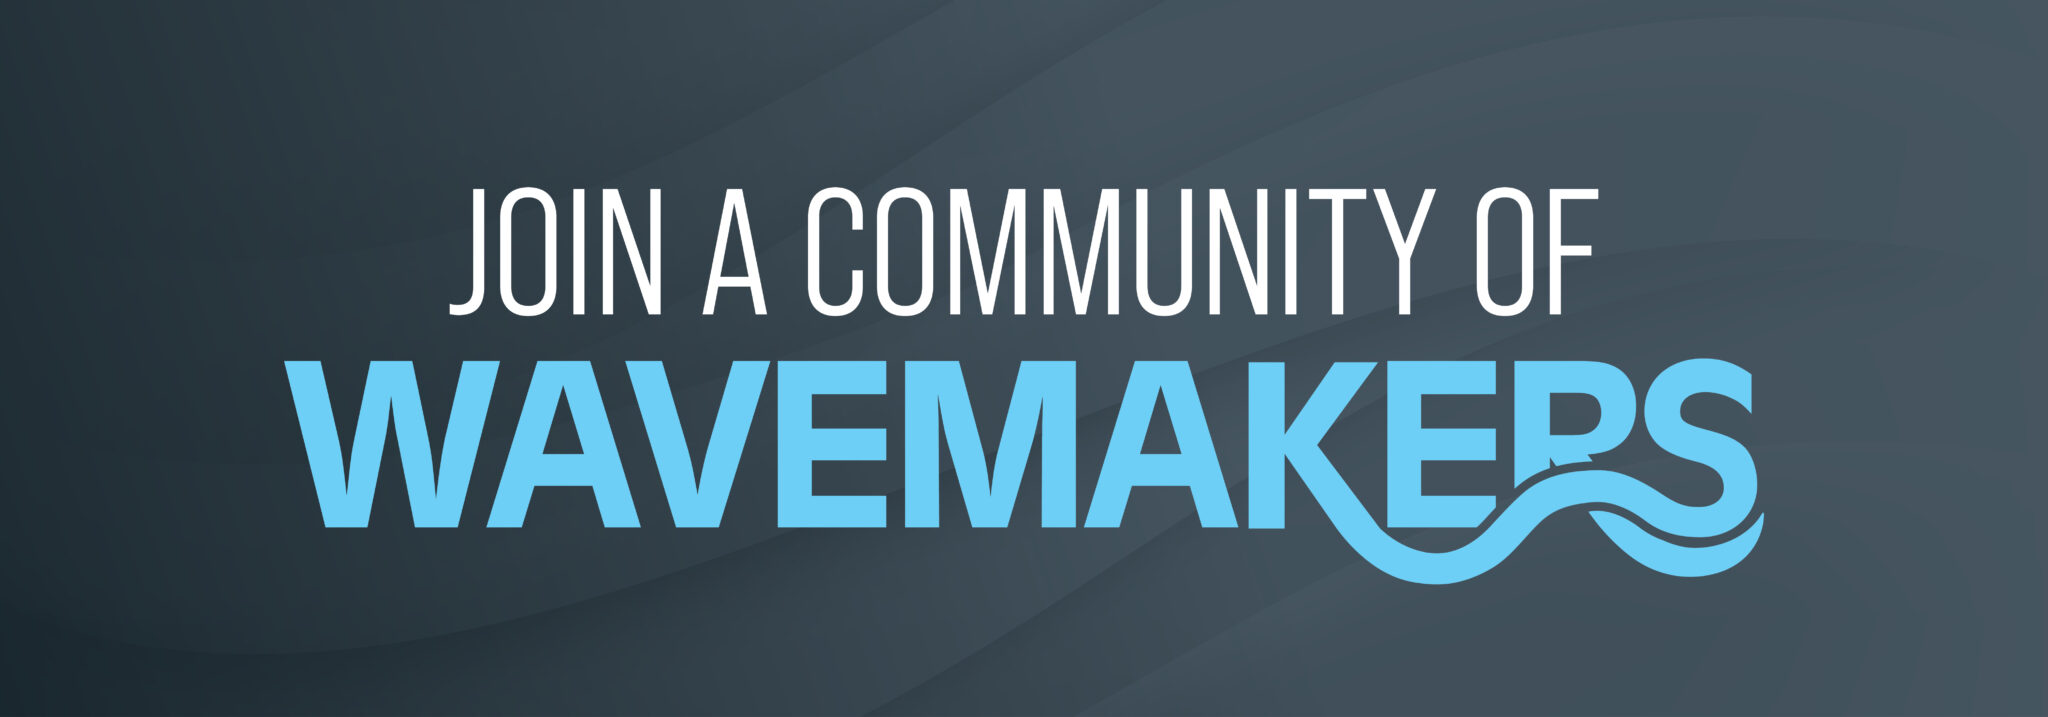 Join a Community of Wavemakers